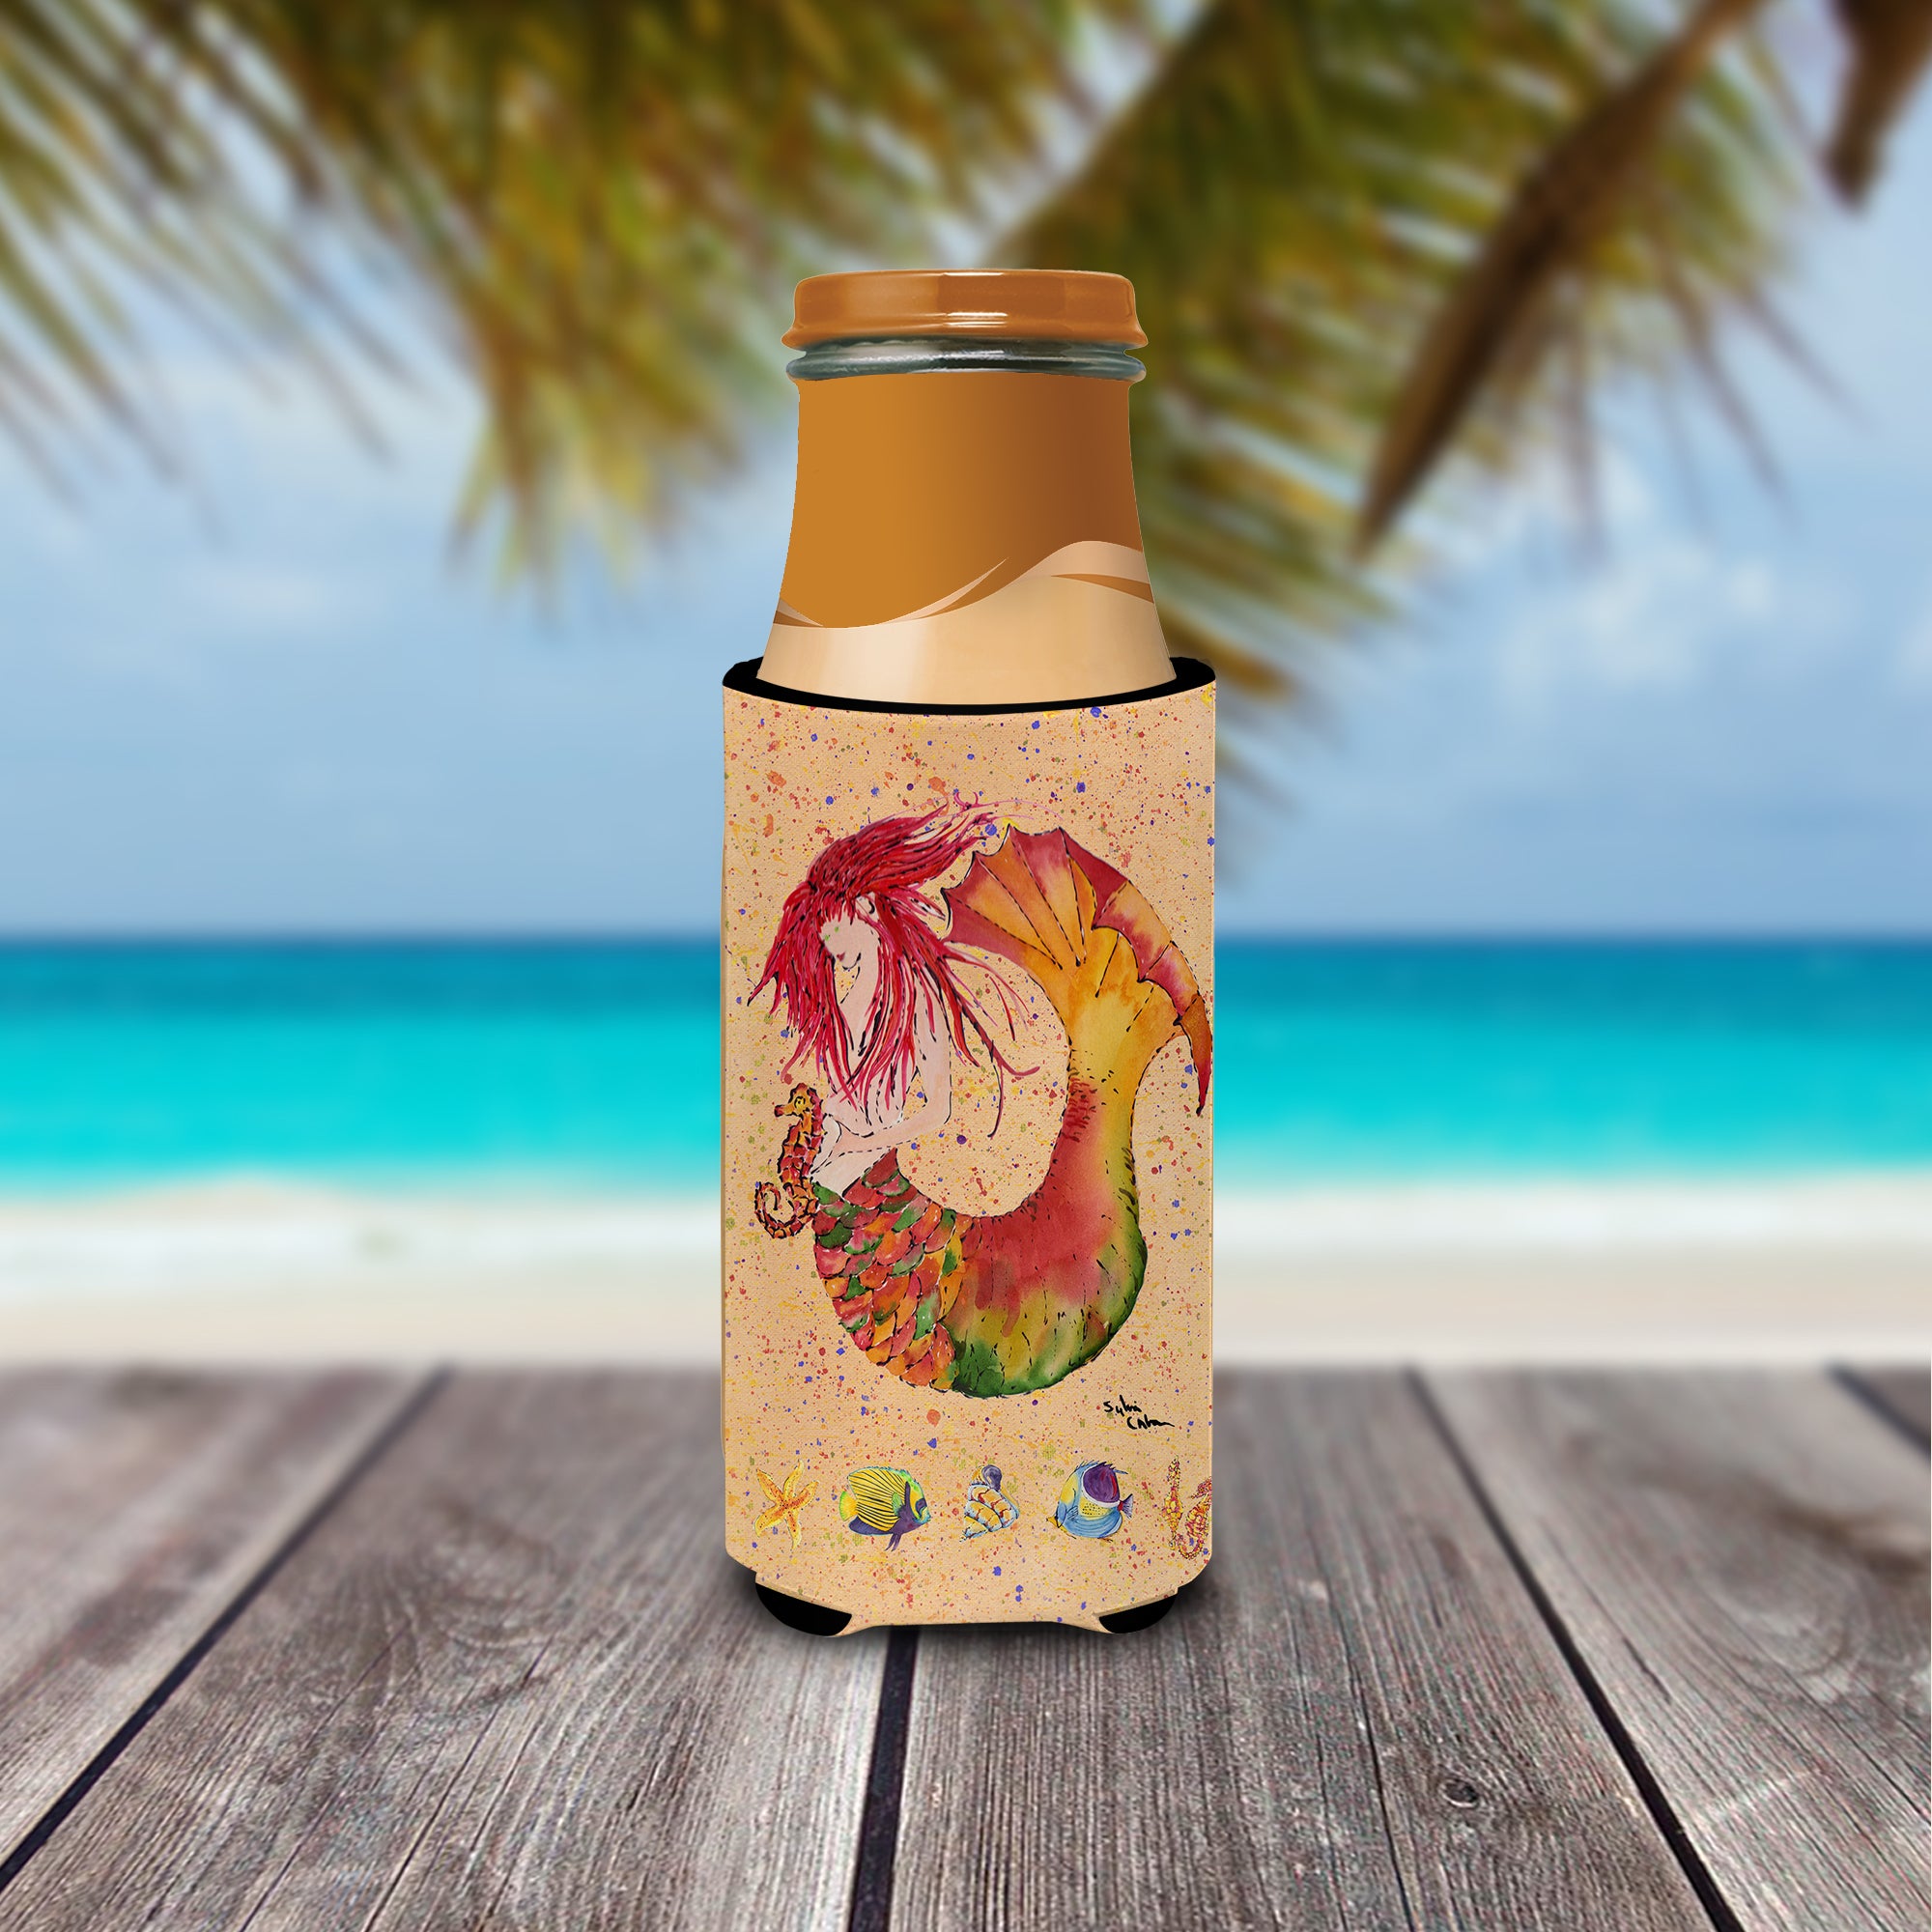 Red Headed Ginger Mermaid on Coral Ultra Beverage Isolateurs pour canettes minces 8339MUK